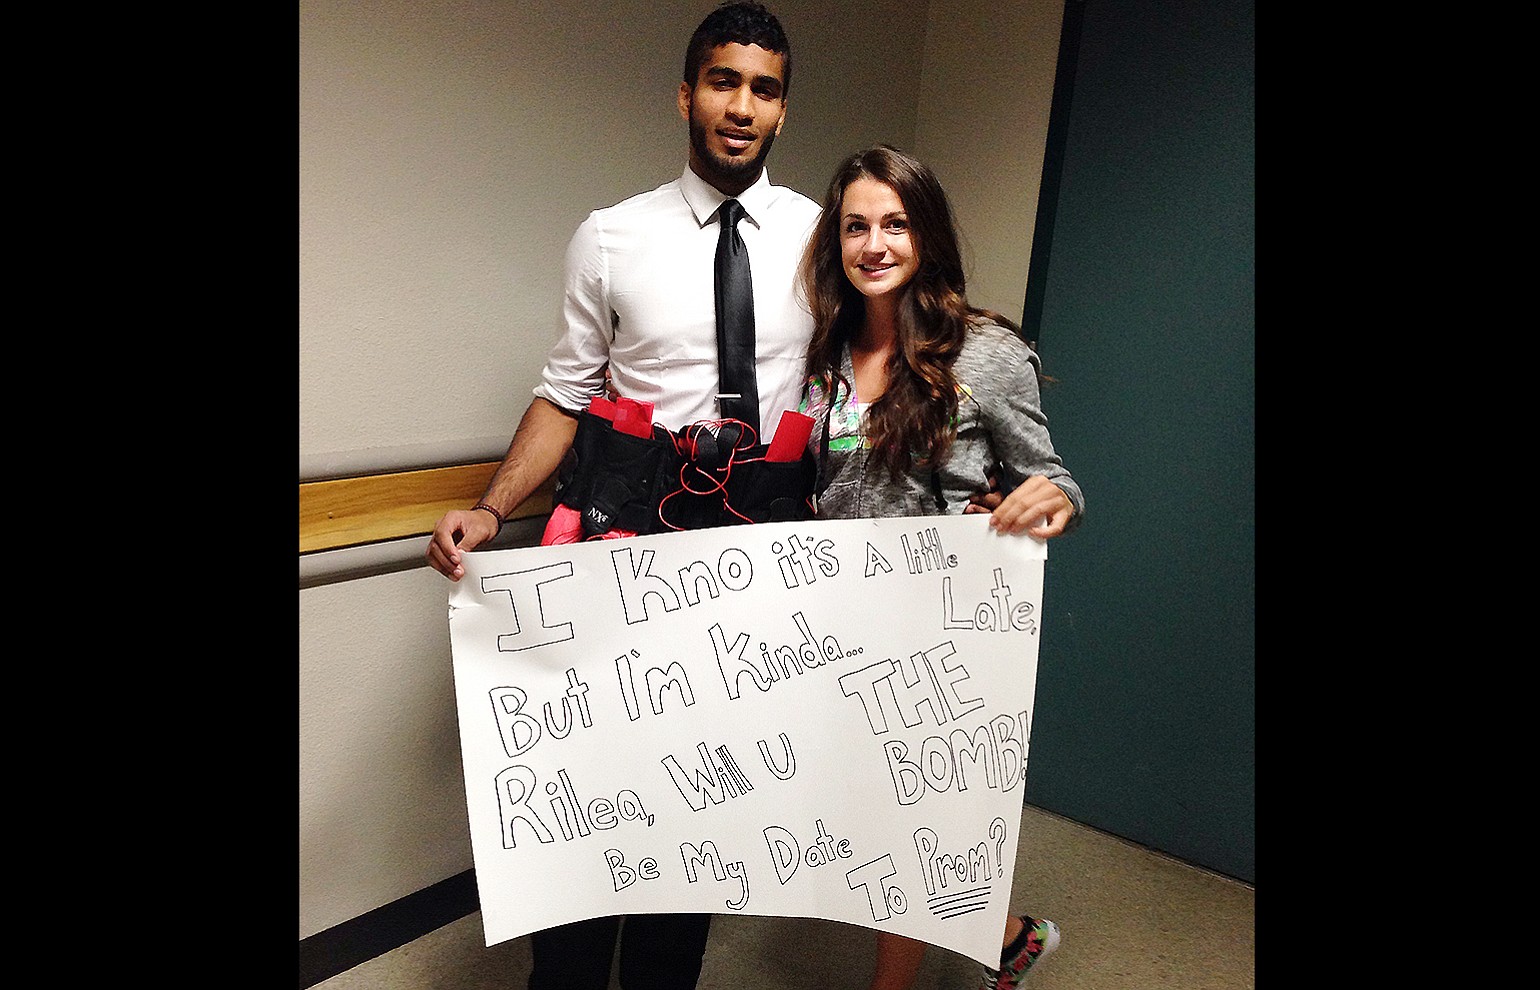 La Center High senior Ibrahim Ahmad strapped fake explosives around his waist this week as part of a stunt to ask Rilea Wolfe to prom.